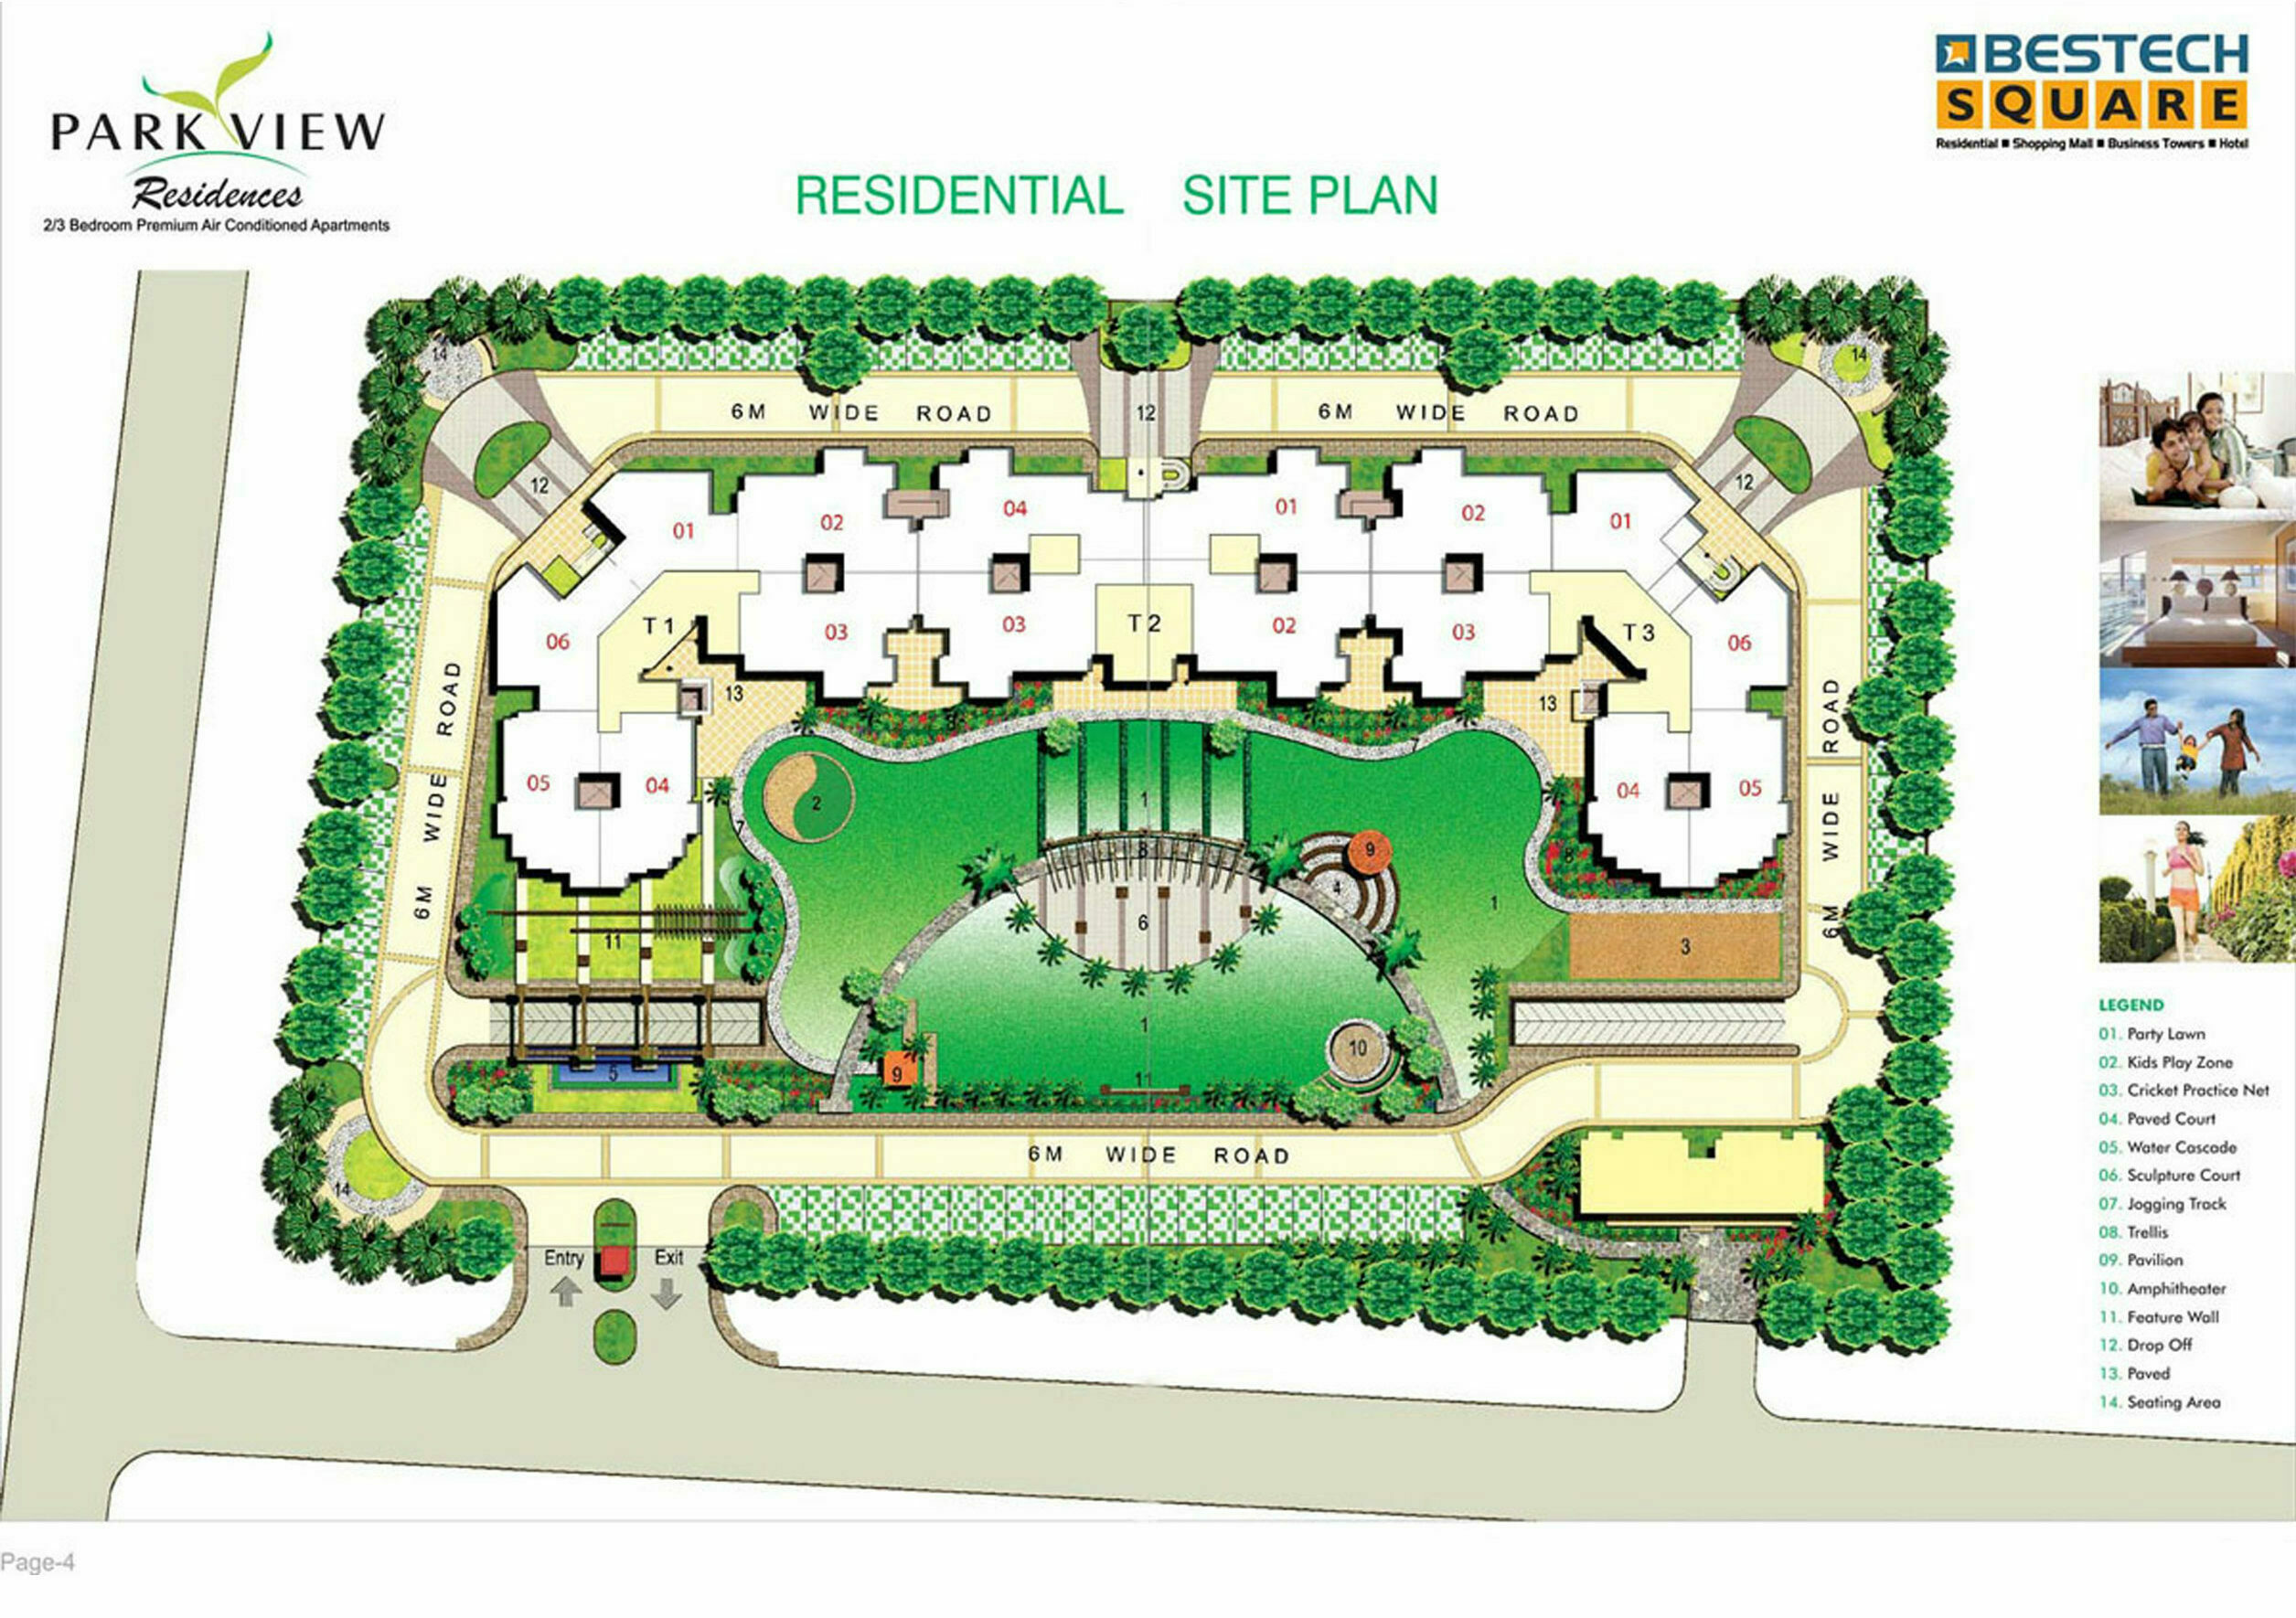 Site Plan of Bestech Park View Residences